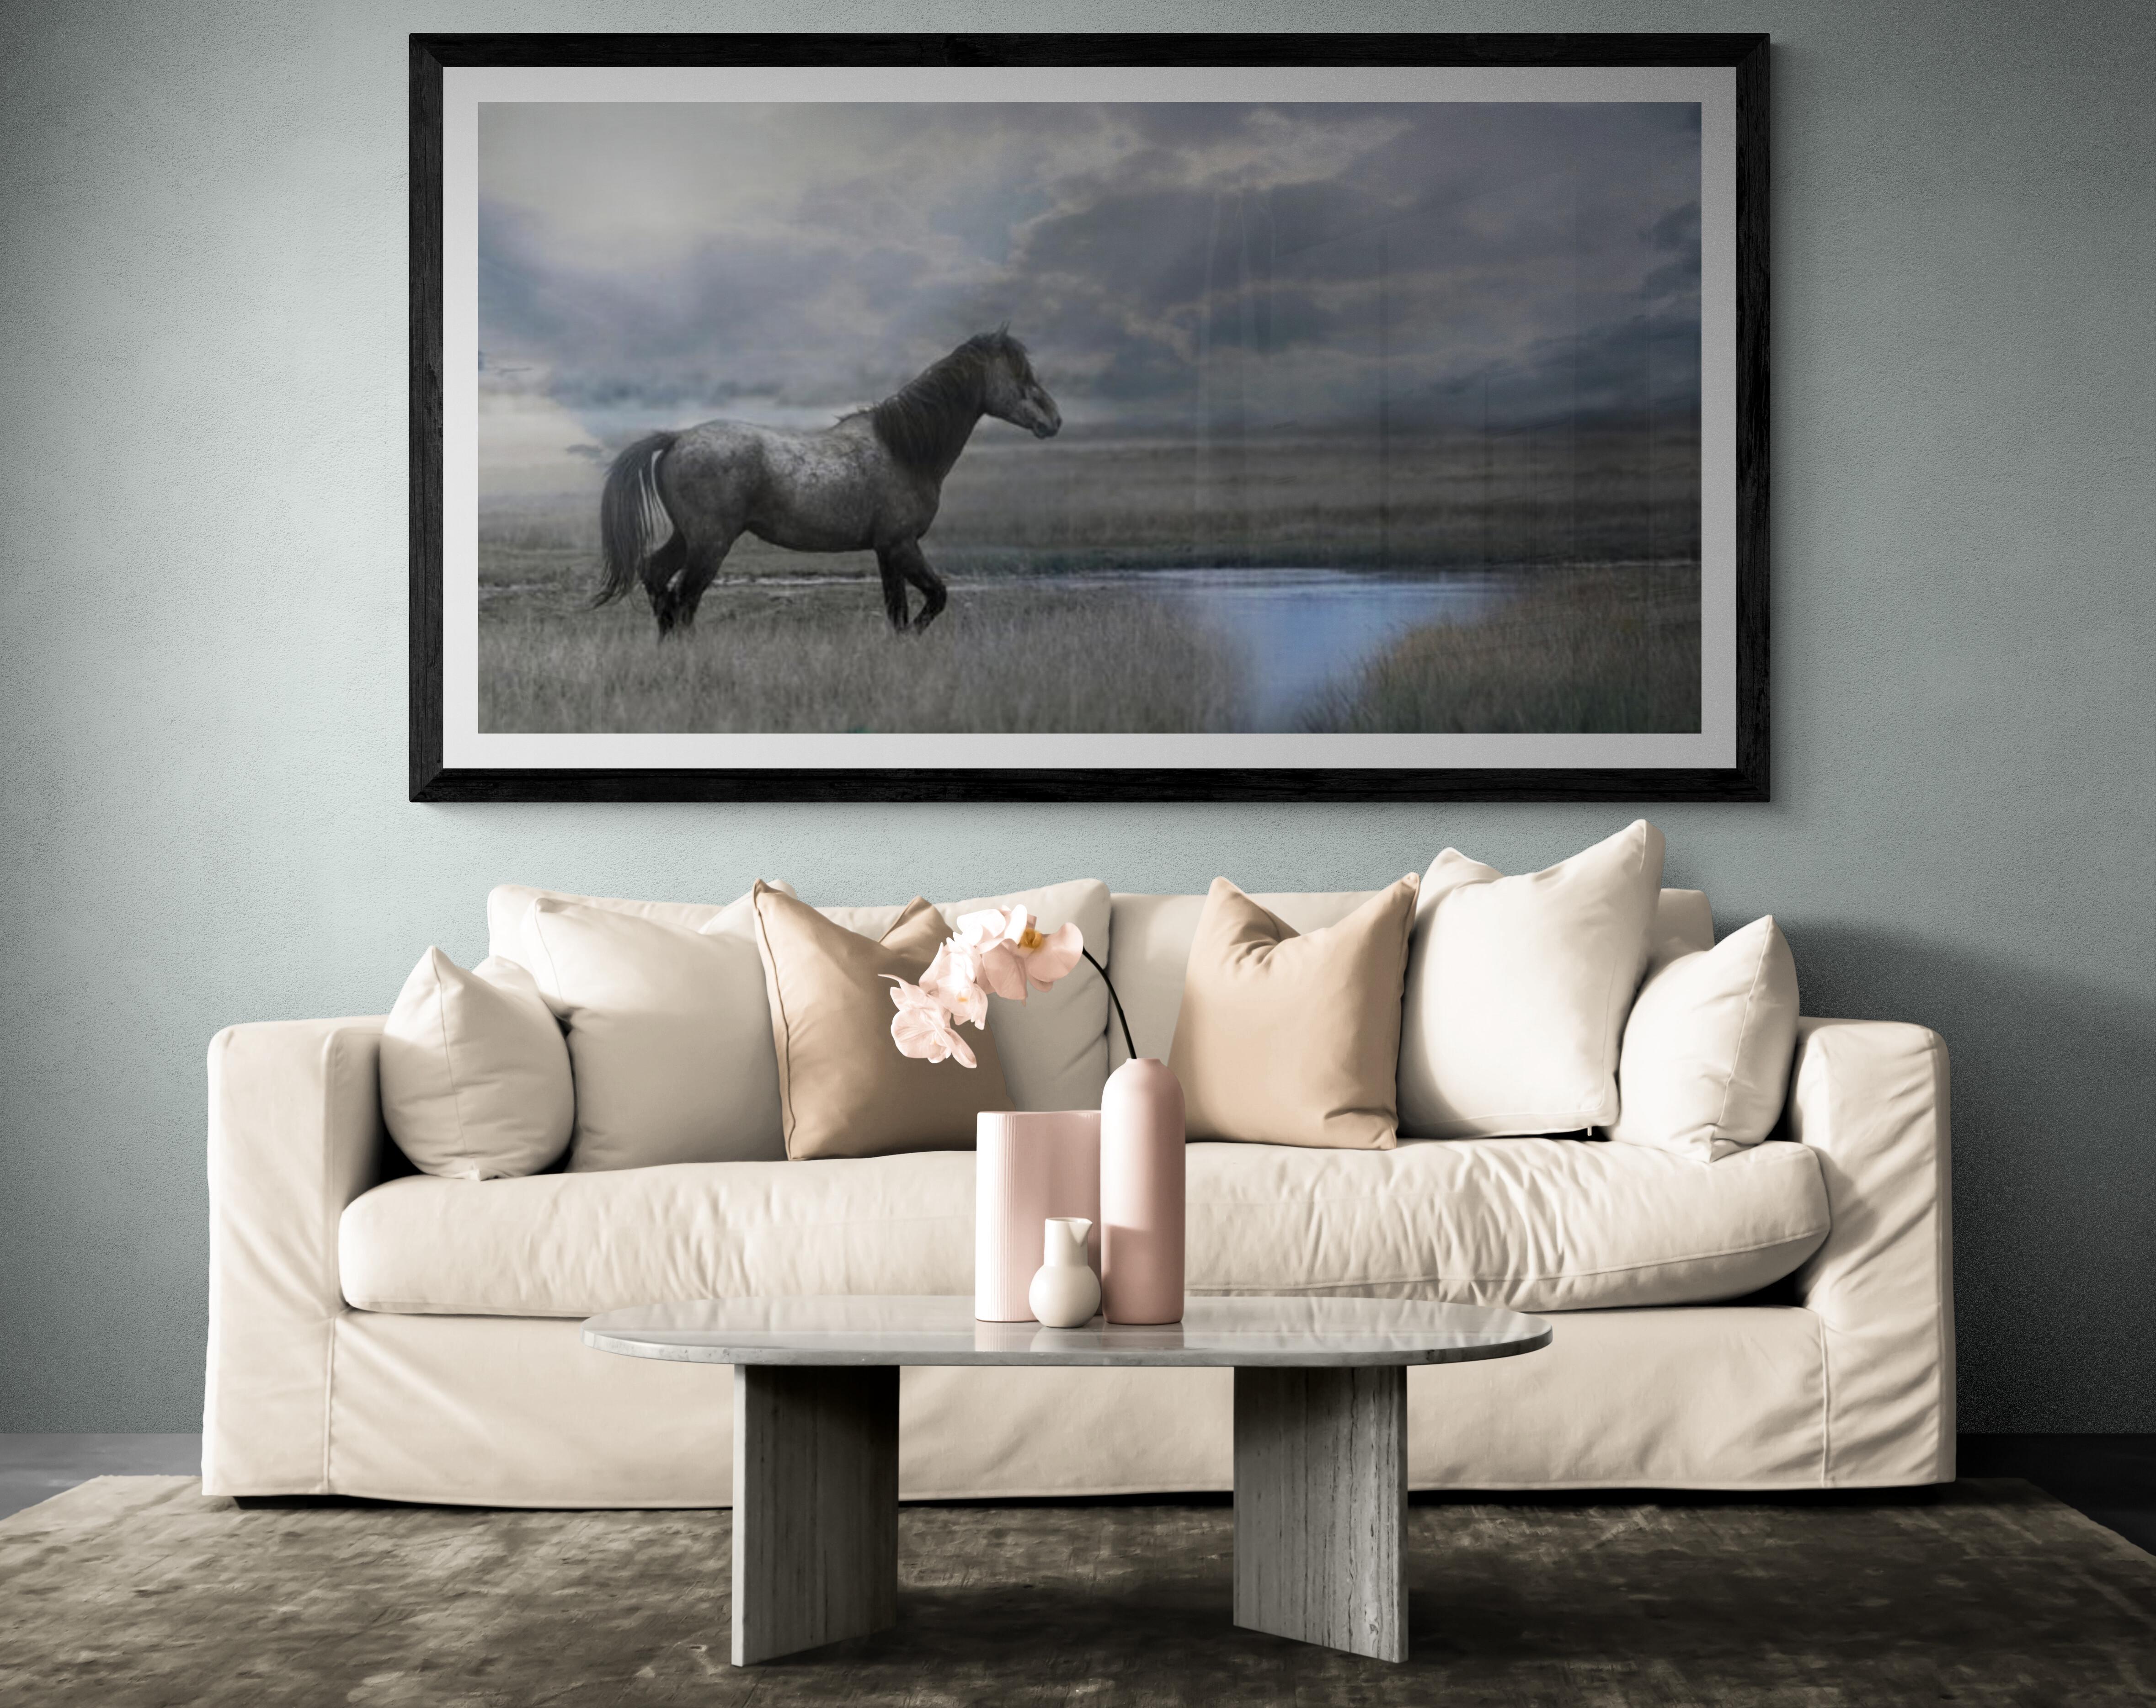 « Once Upon a Time in the West »  Photographie 30x60 de chevaux moutons sauvages - Art en vente 2